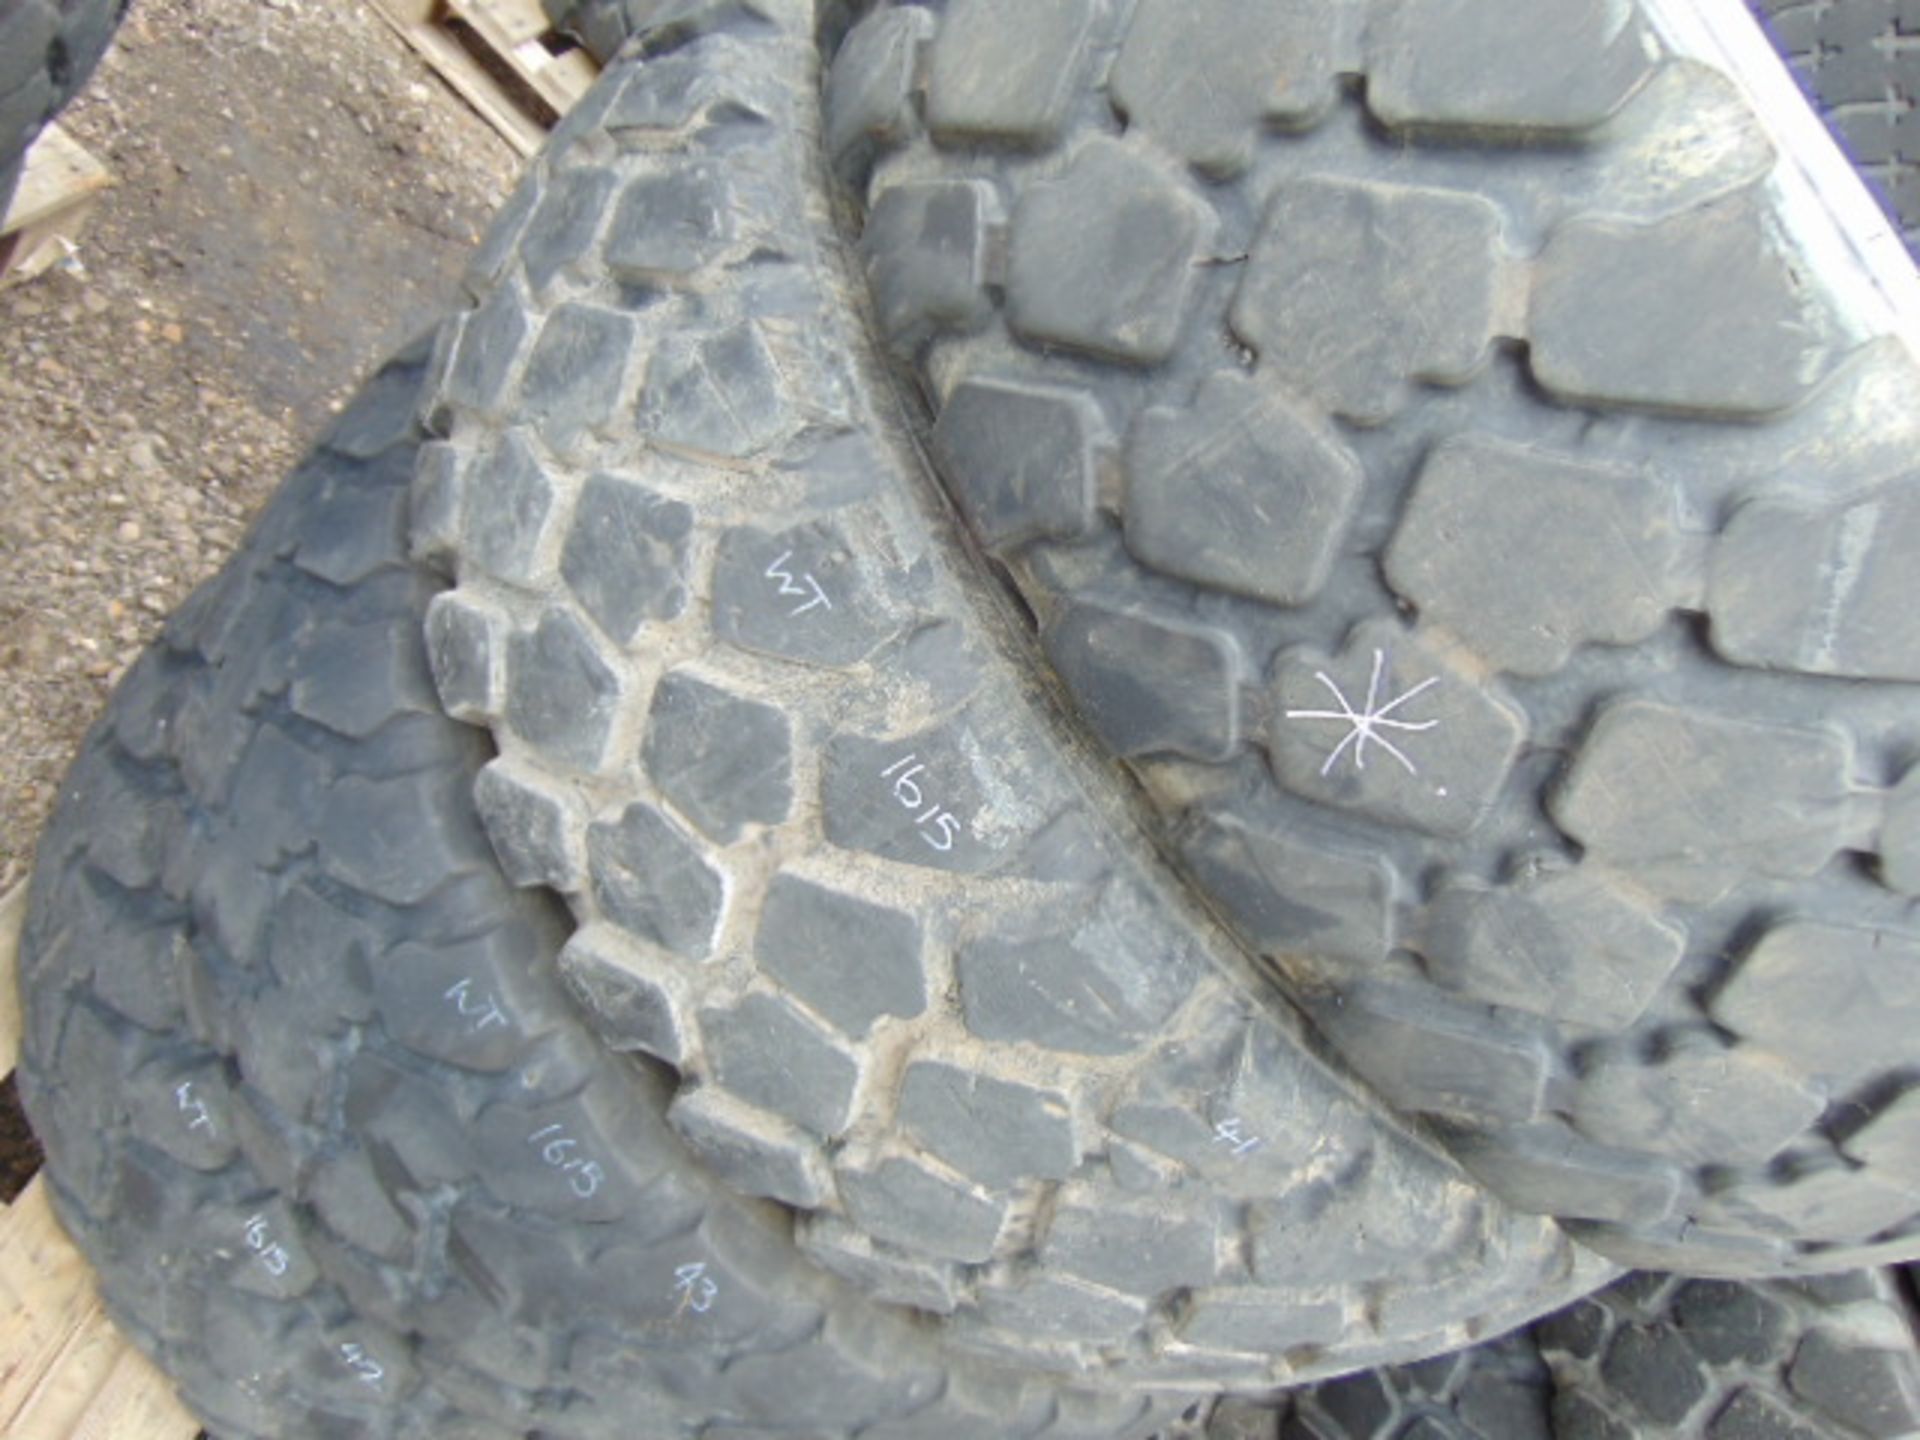 4 x Michelin 365/85 R20 XZL Tyres - Image 4 of 6